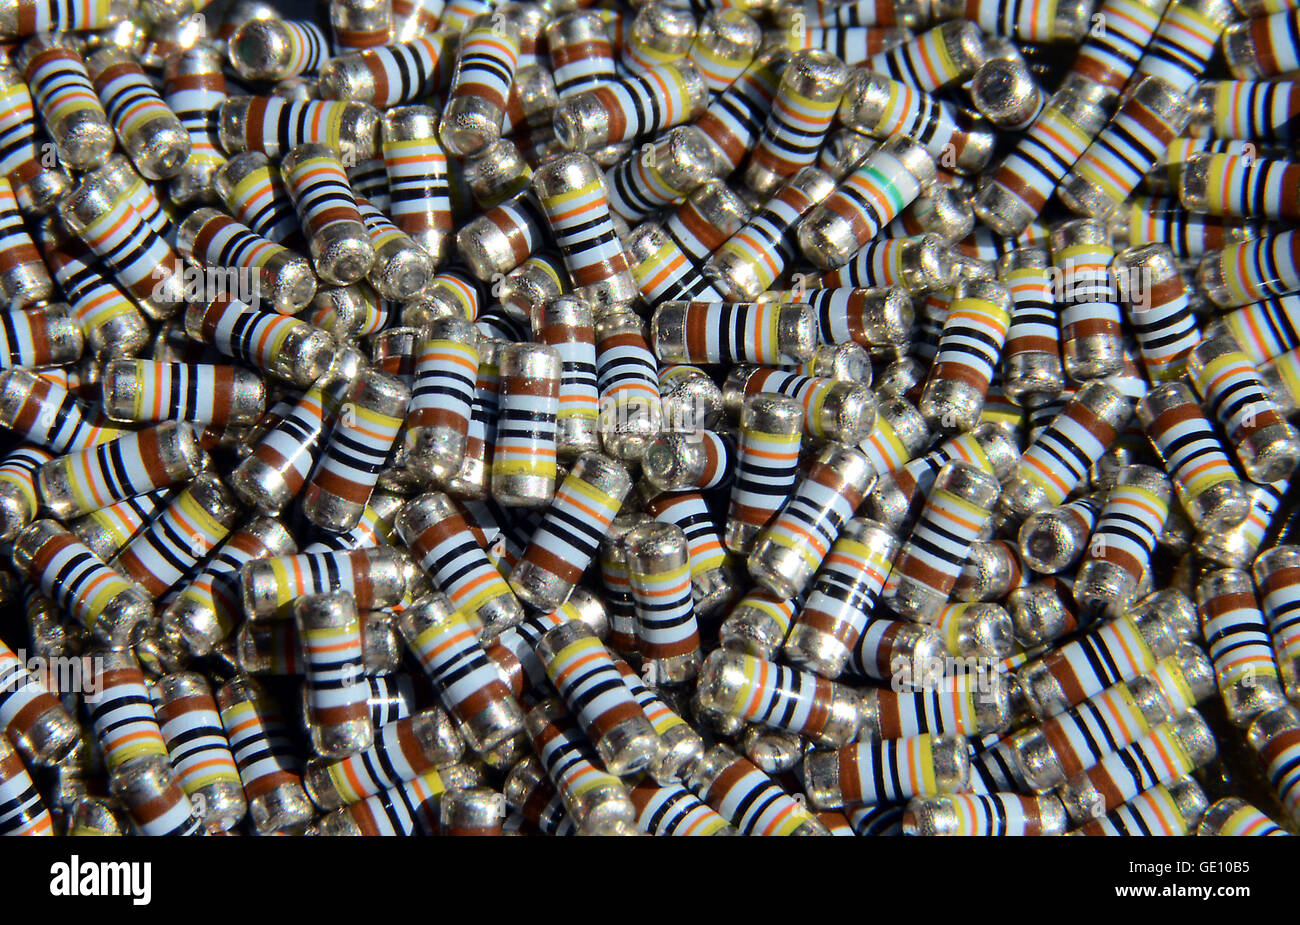 A large number of identical new unused SMD resistors. Or wait, are they all identical? Find the deviant! Stock Photo